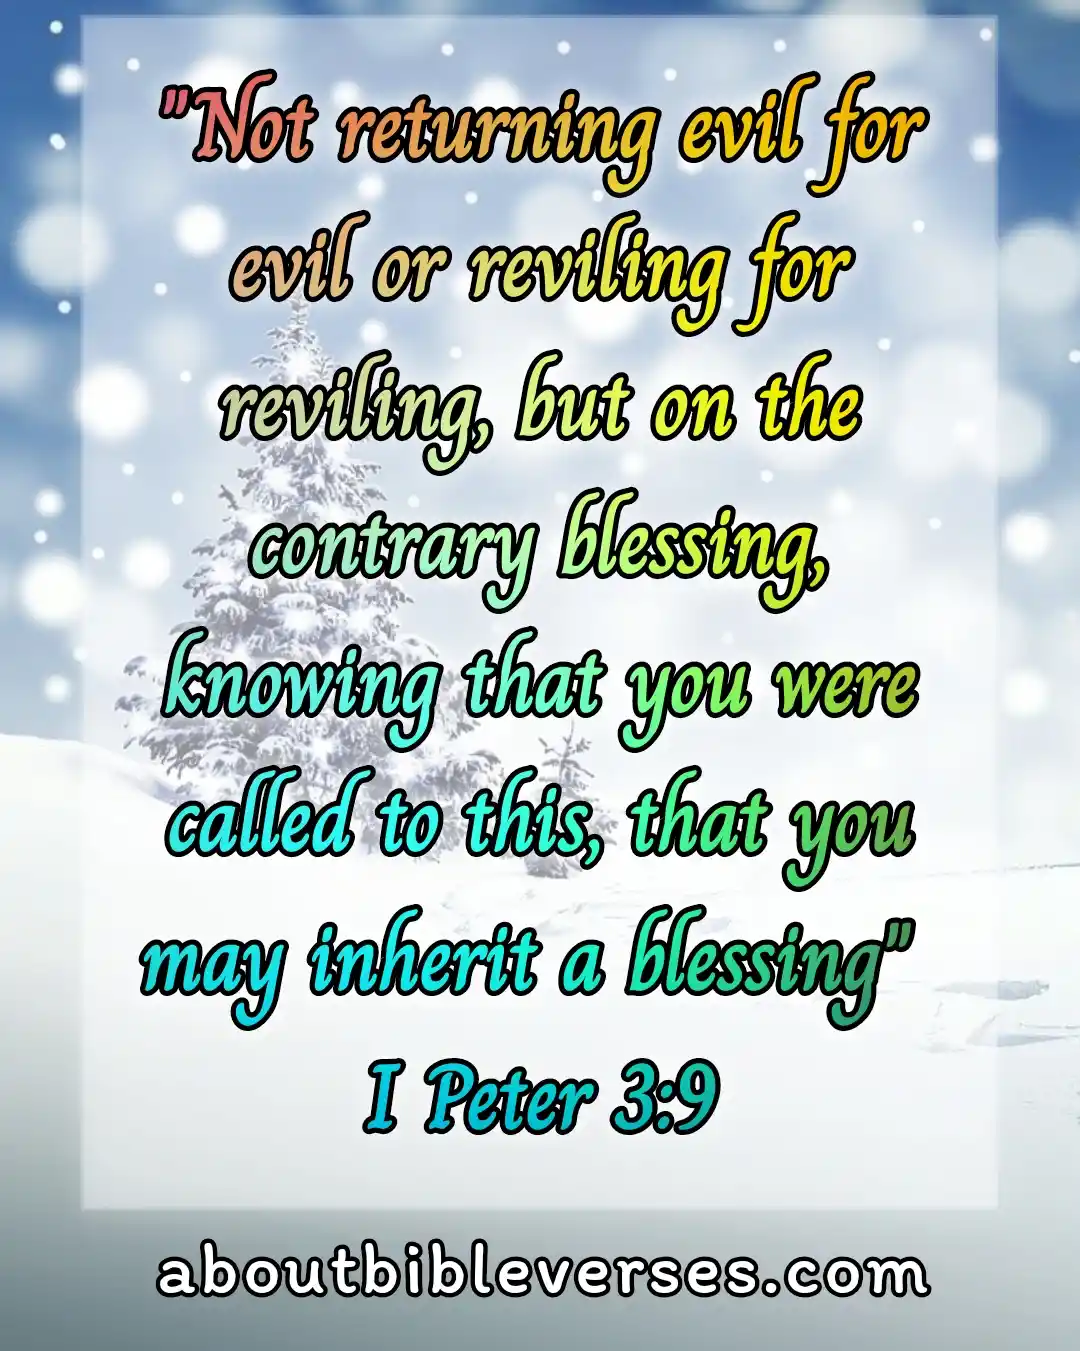 Happy Friday Blessings With Bible Verses (1 Peter 3:9)